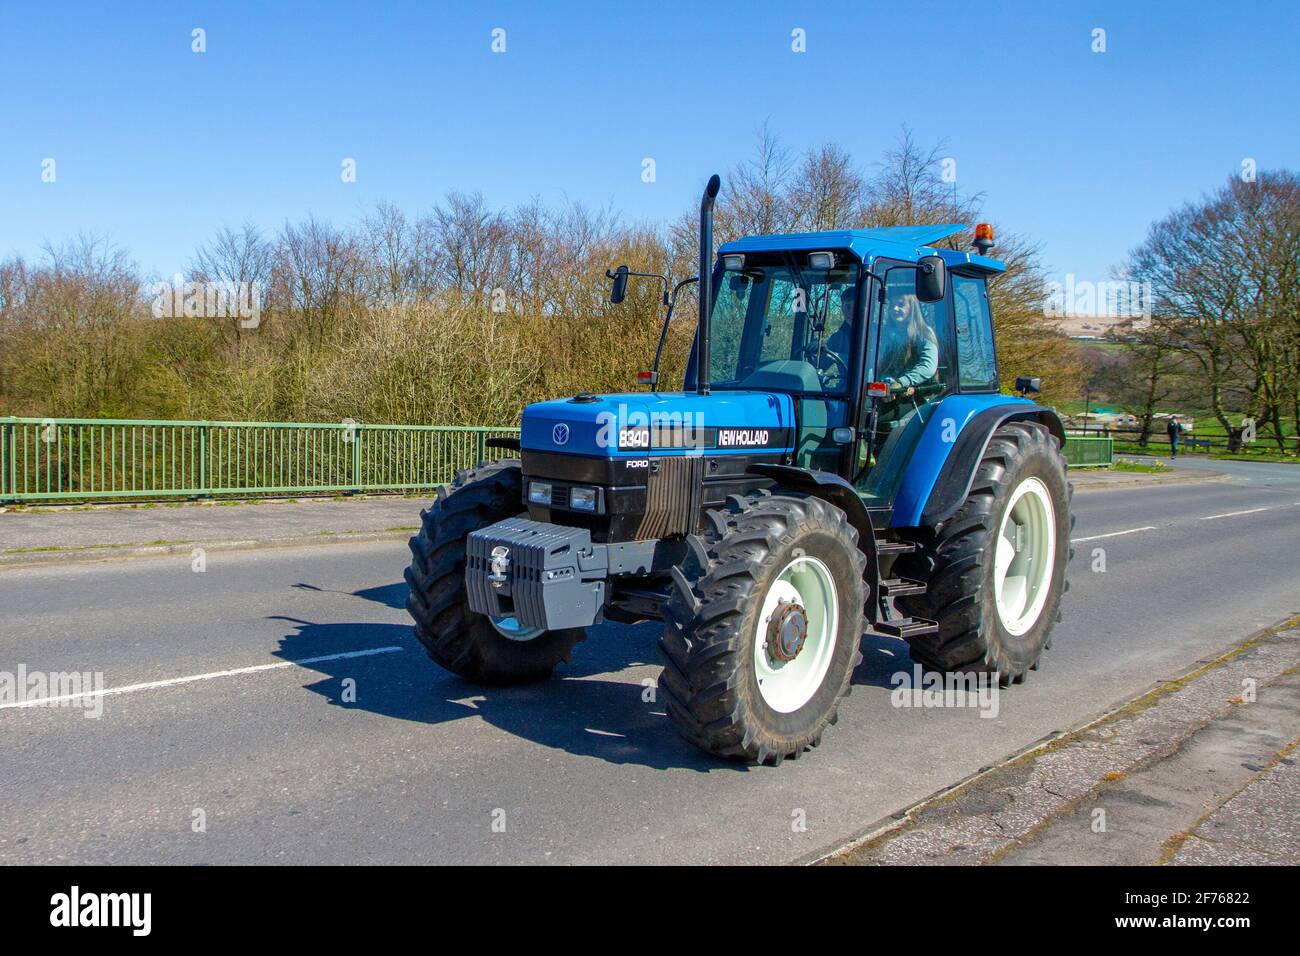 https://c8.alamy.com/comp/2F76822/ford-8340-new-holland-tractor-in-chorley-lancashire-uk-weather-fine-sunny-but-cold-day-as-local-young-farmers-stage-an-impromptu-parade-of-modern-vintage-ford-8340-new-holland-tractors-along-the-farm-roads-in-chorley-2F76822.jpg